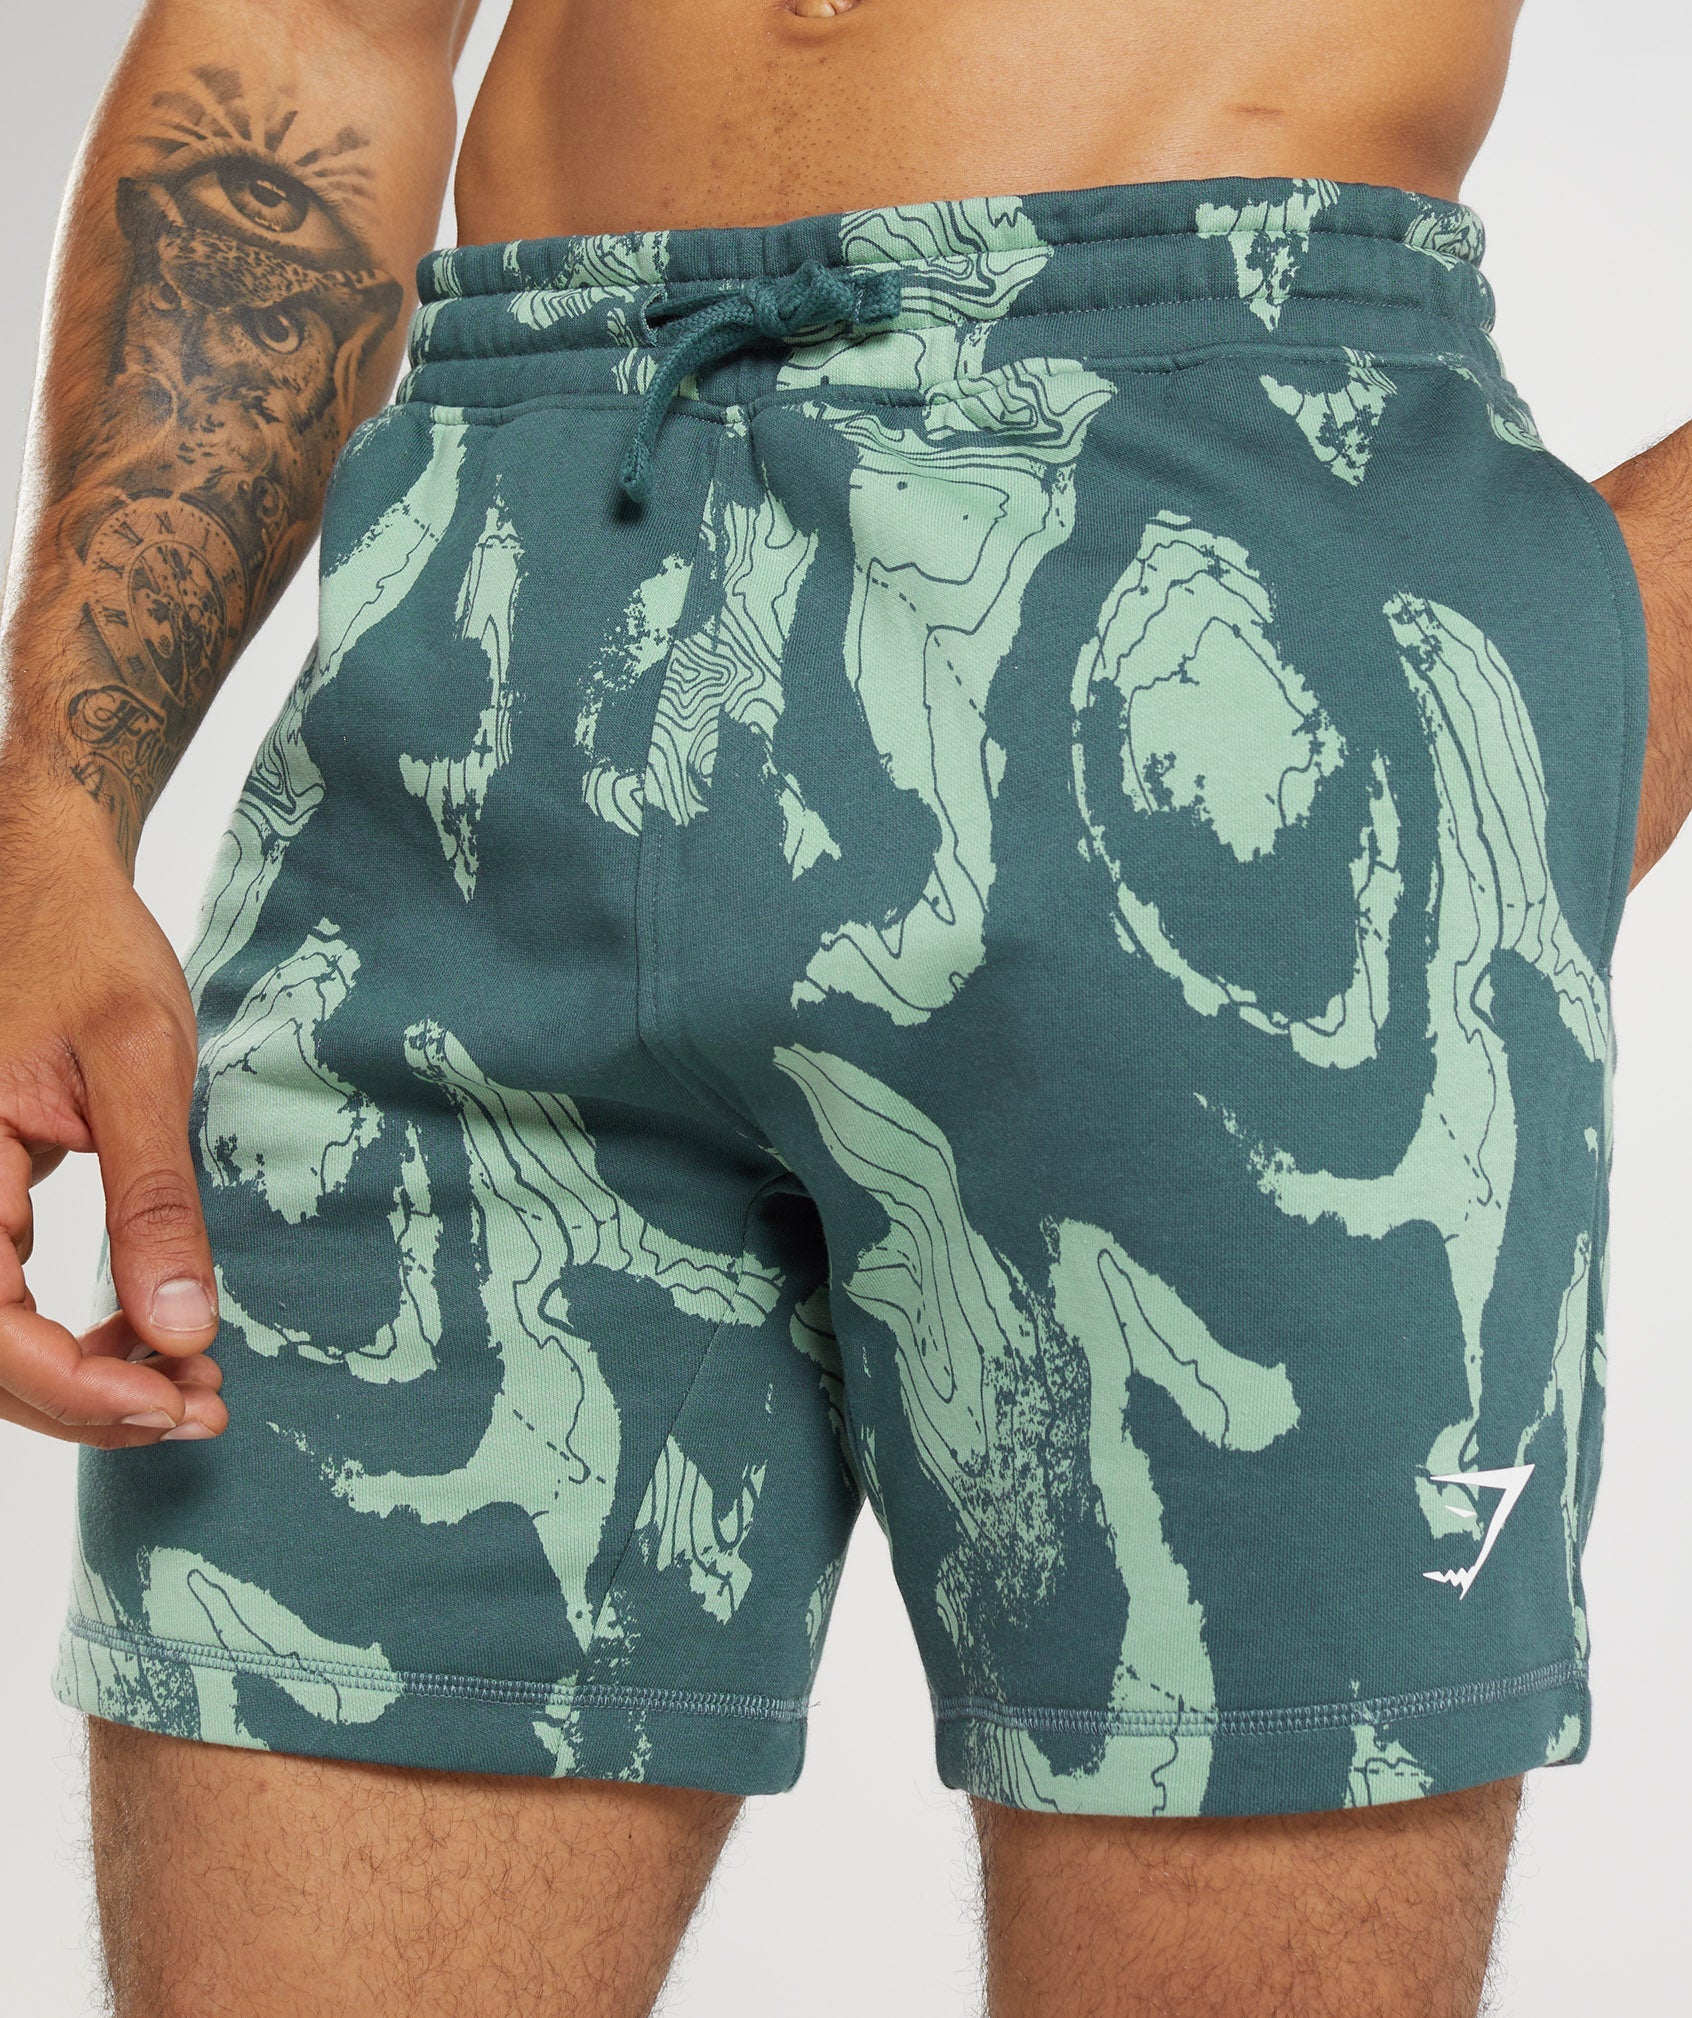 Map Print Shorts in Teal Print - view 5